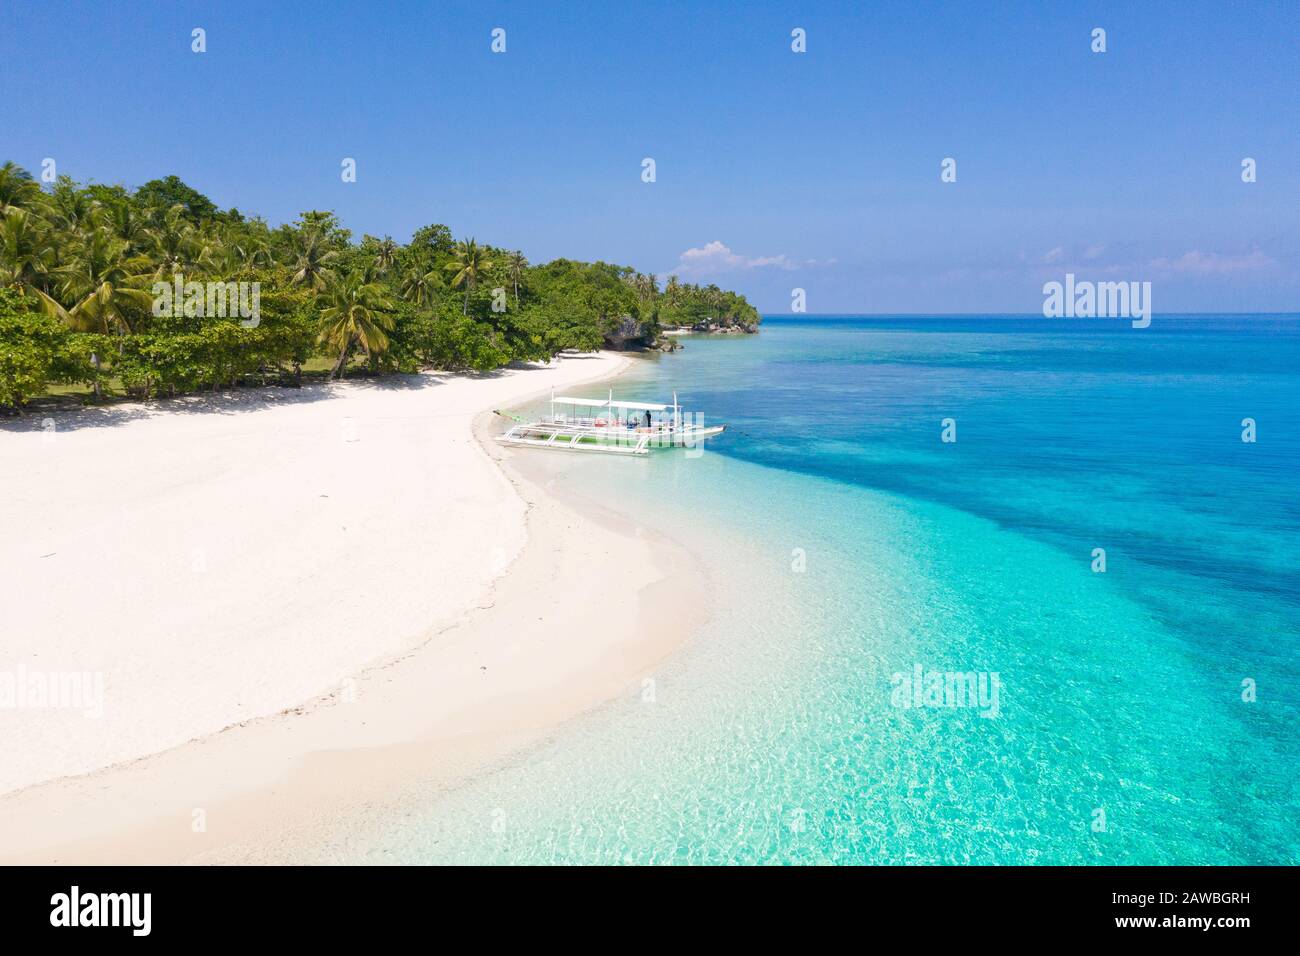 Tropical island with a white beach. Island with palm trees and white sand, top view. Summer and travel vacation concept. Mahaba Island, Philippines. Stock Photo